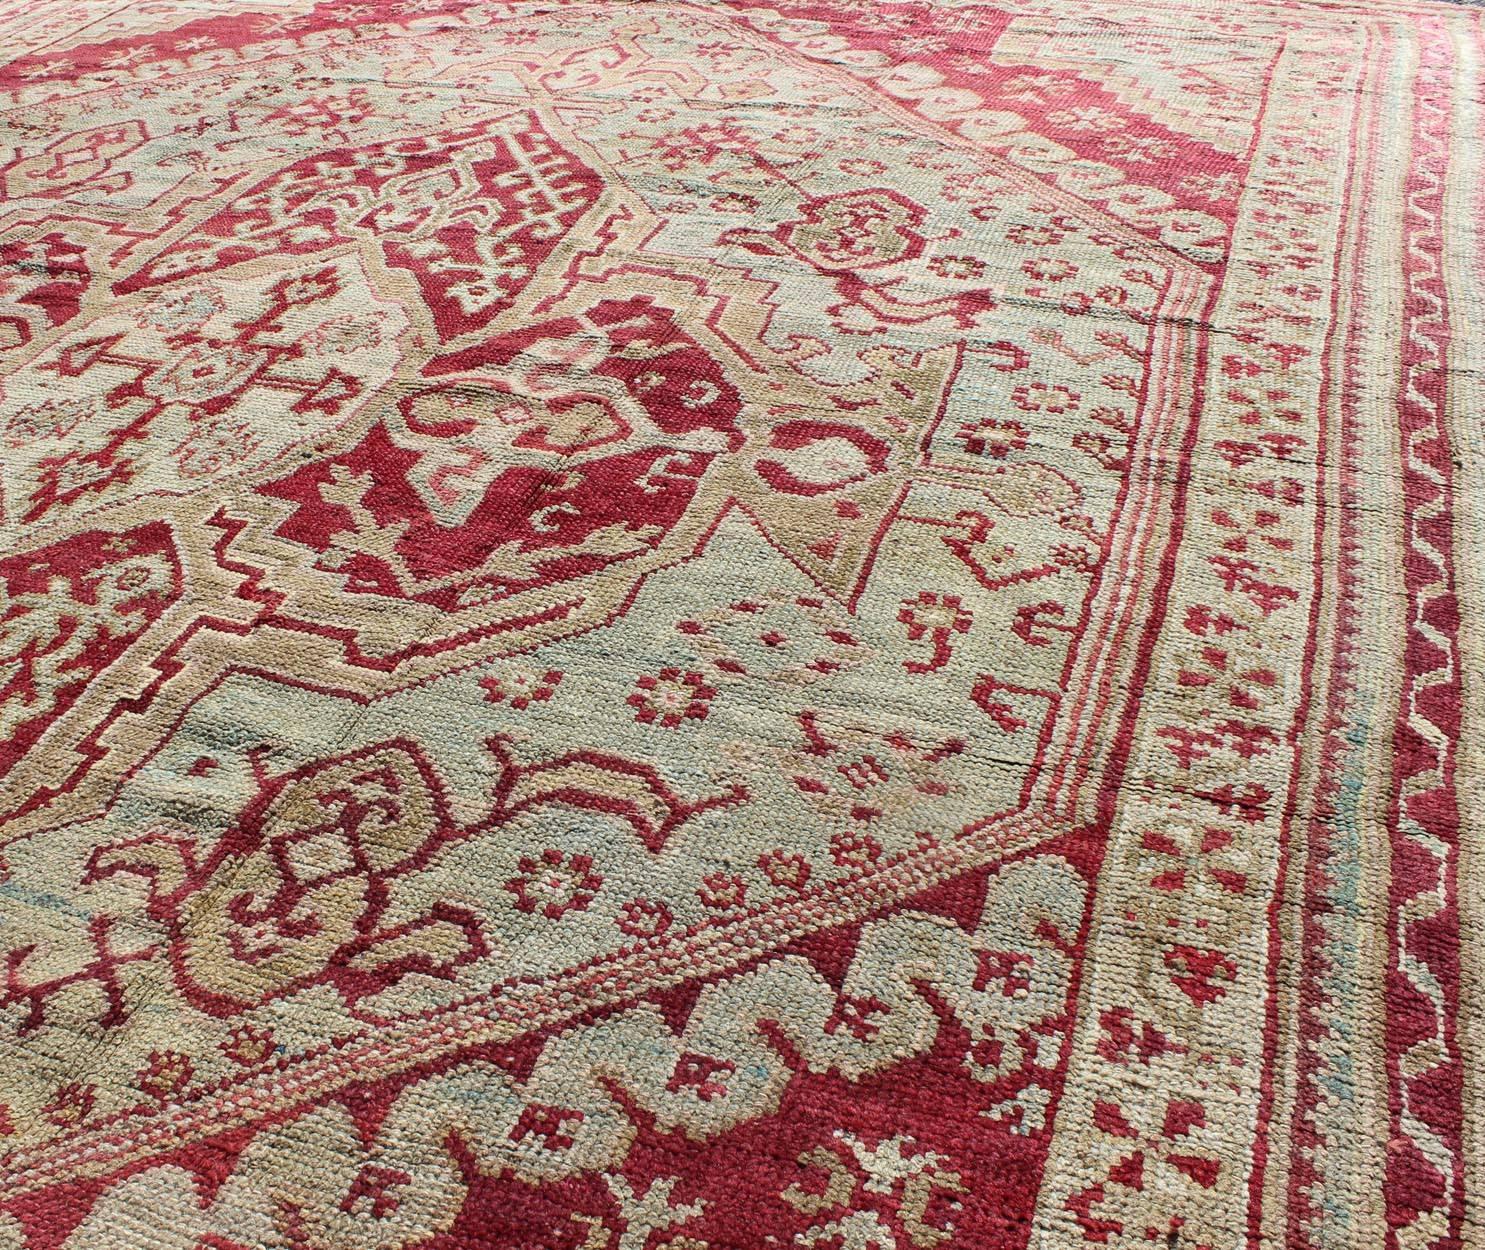 Antique Turkish Ghiordes 19th Century Rug in Raspberry Red, Ice Blue & L. Green In Good Condition For Sale In Atlanta, GA